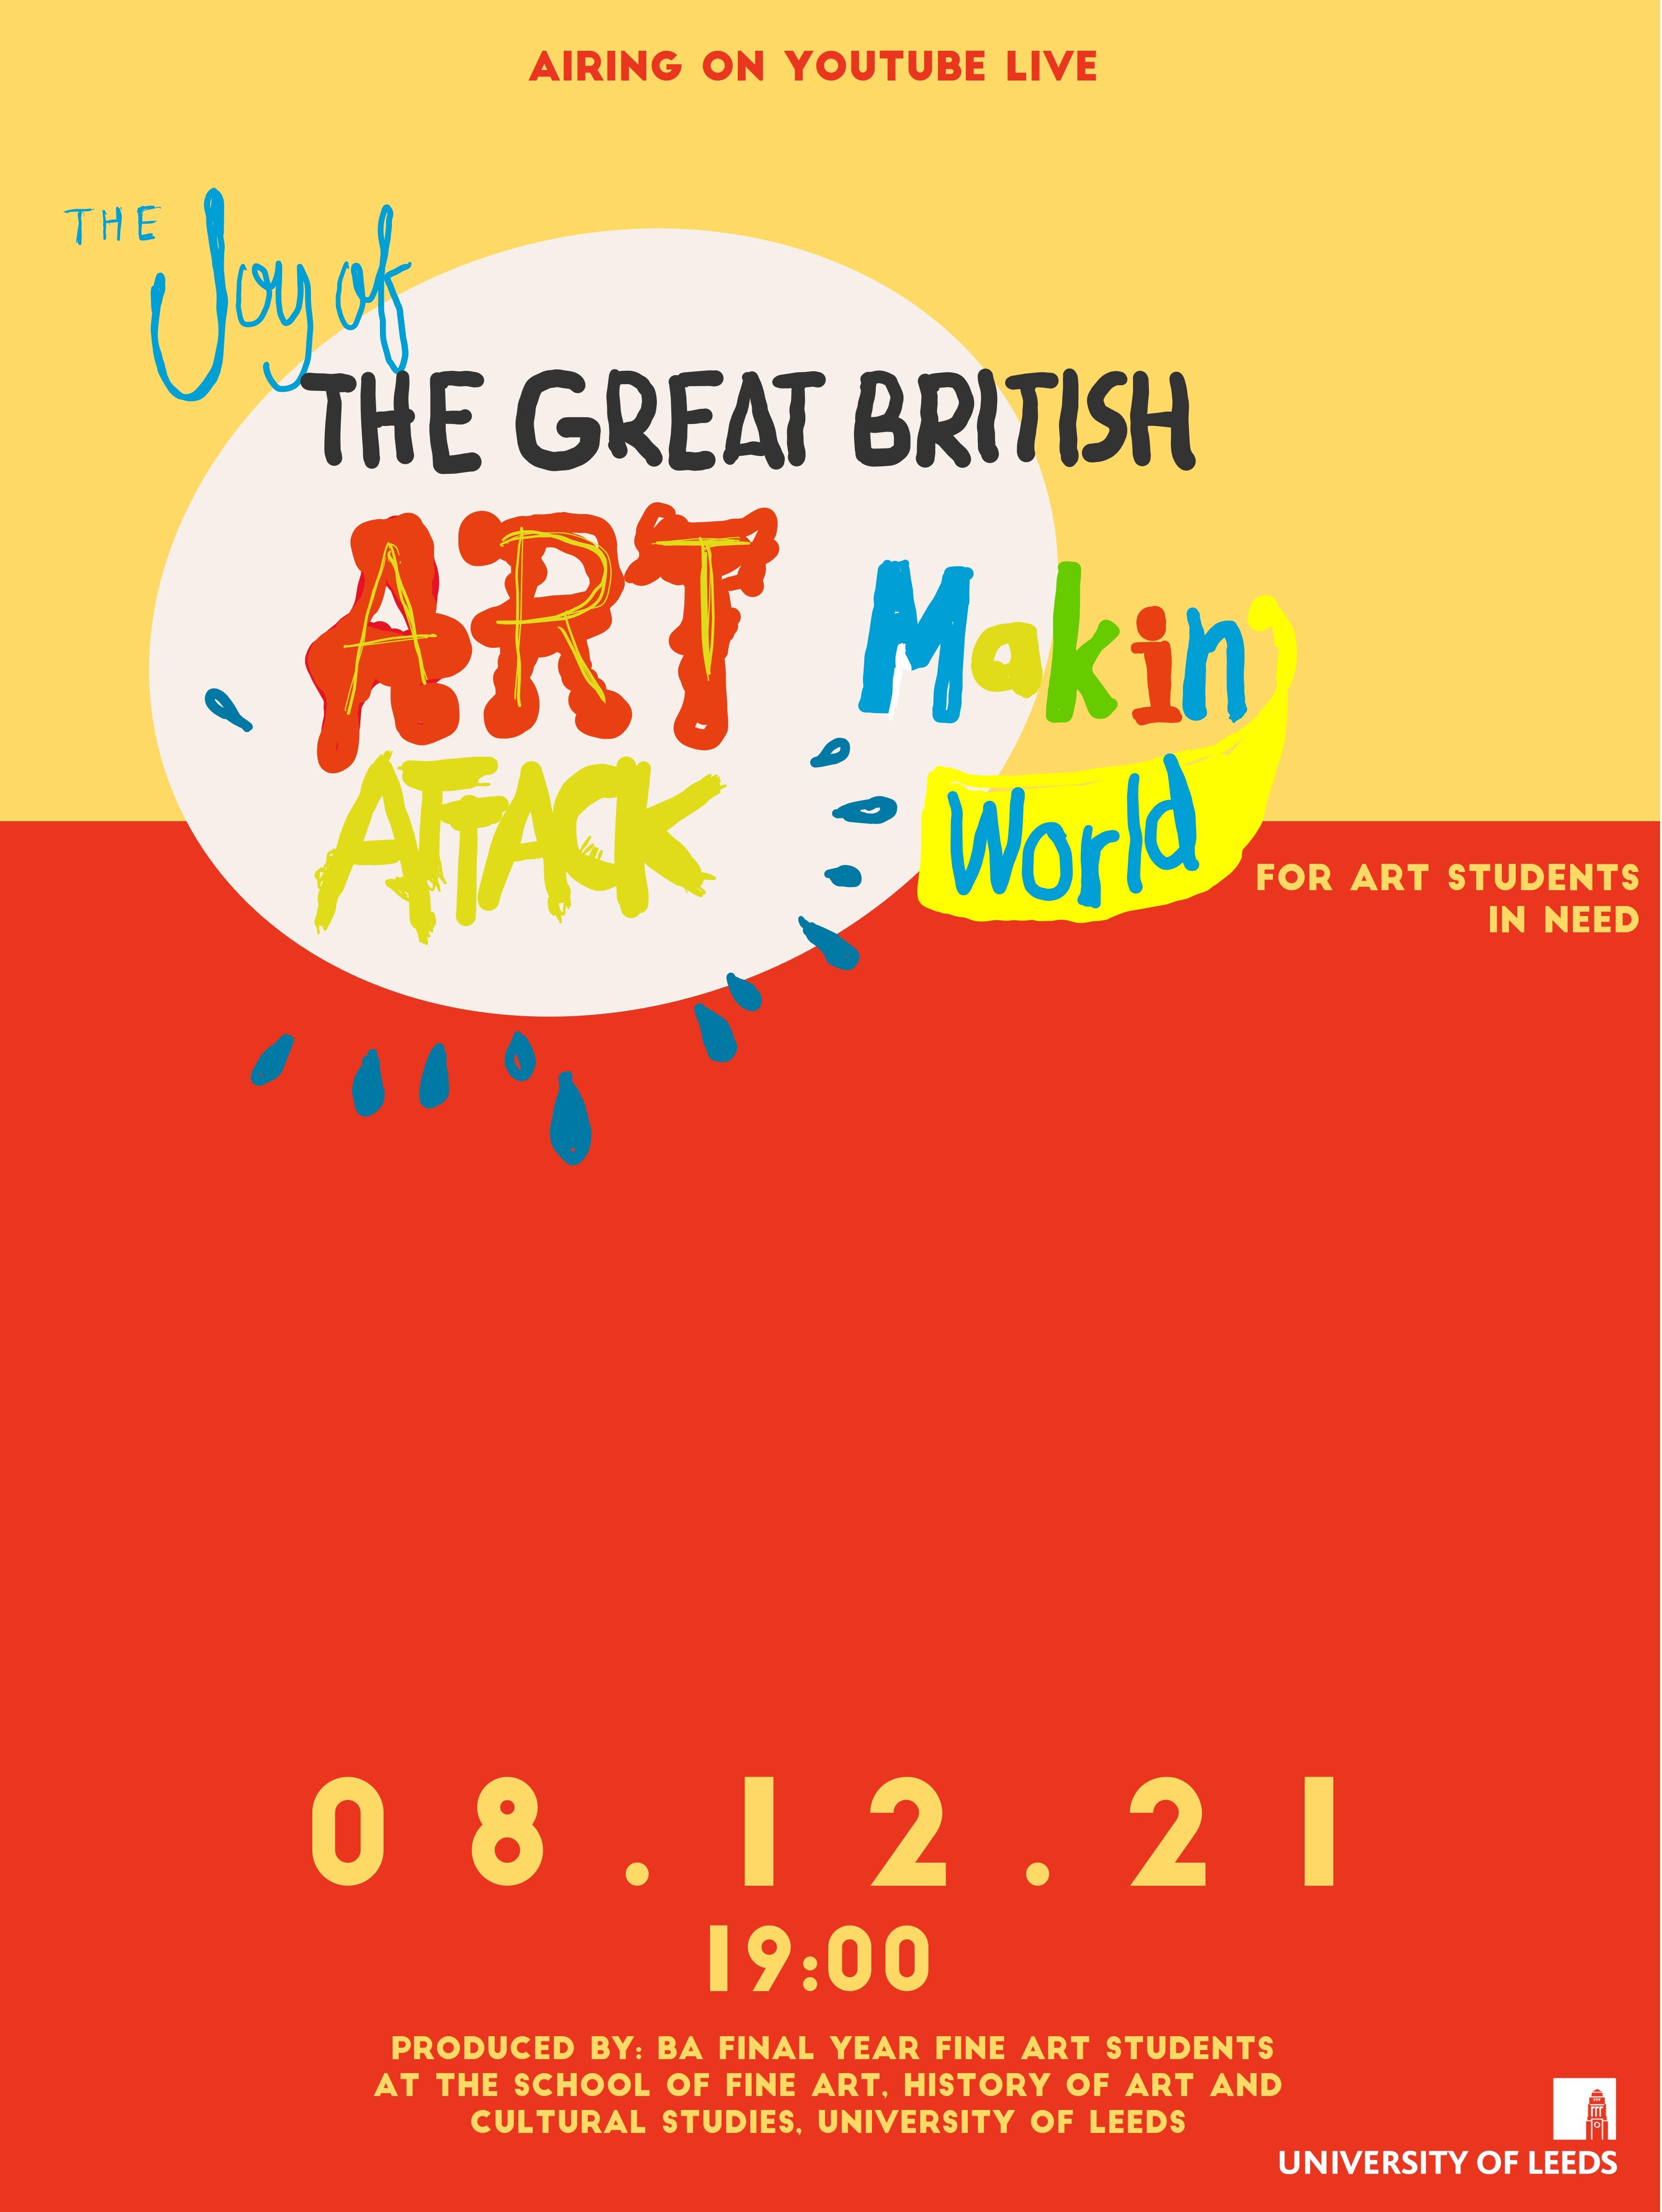 Poster to advertise a BA Fine Art student broadcast event on 8 December 2021, titled The Joy of the Great British Art Attack Making World, for art students in need